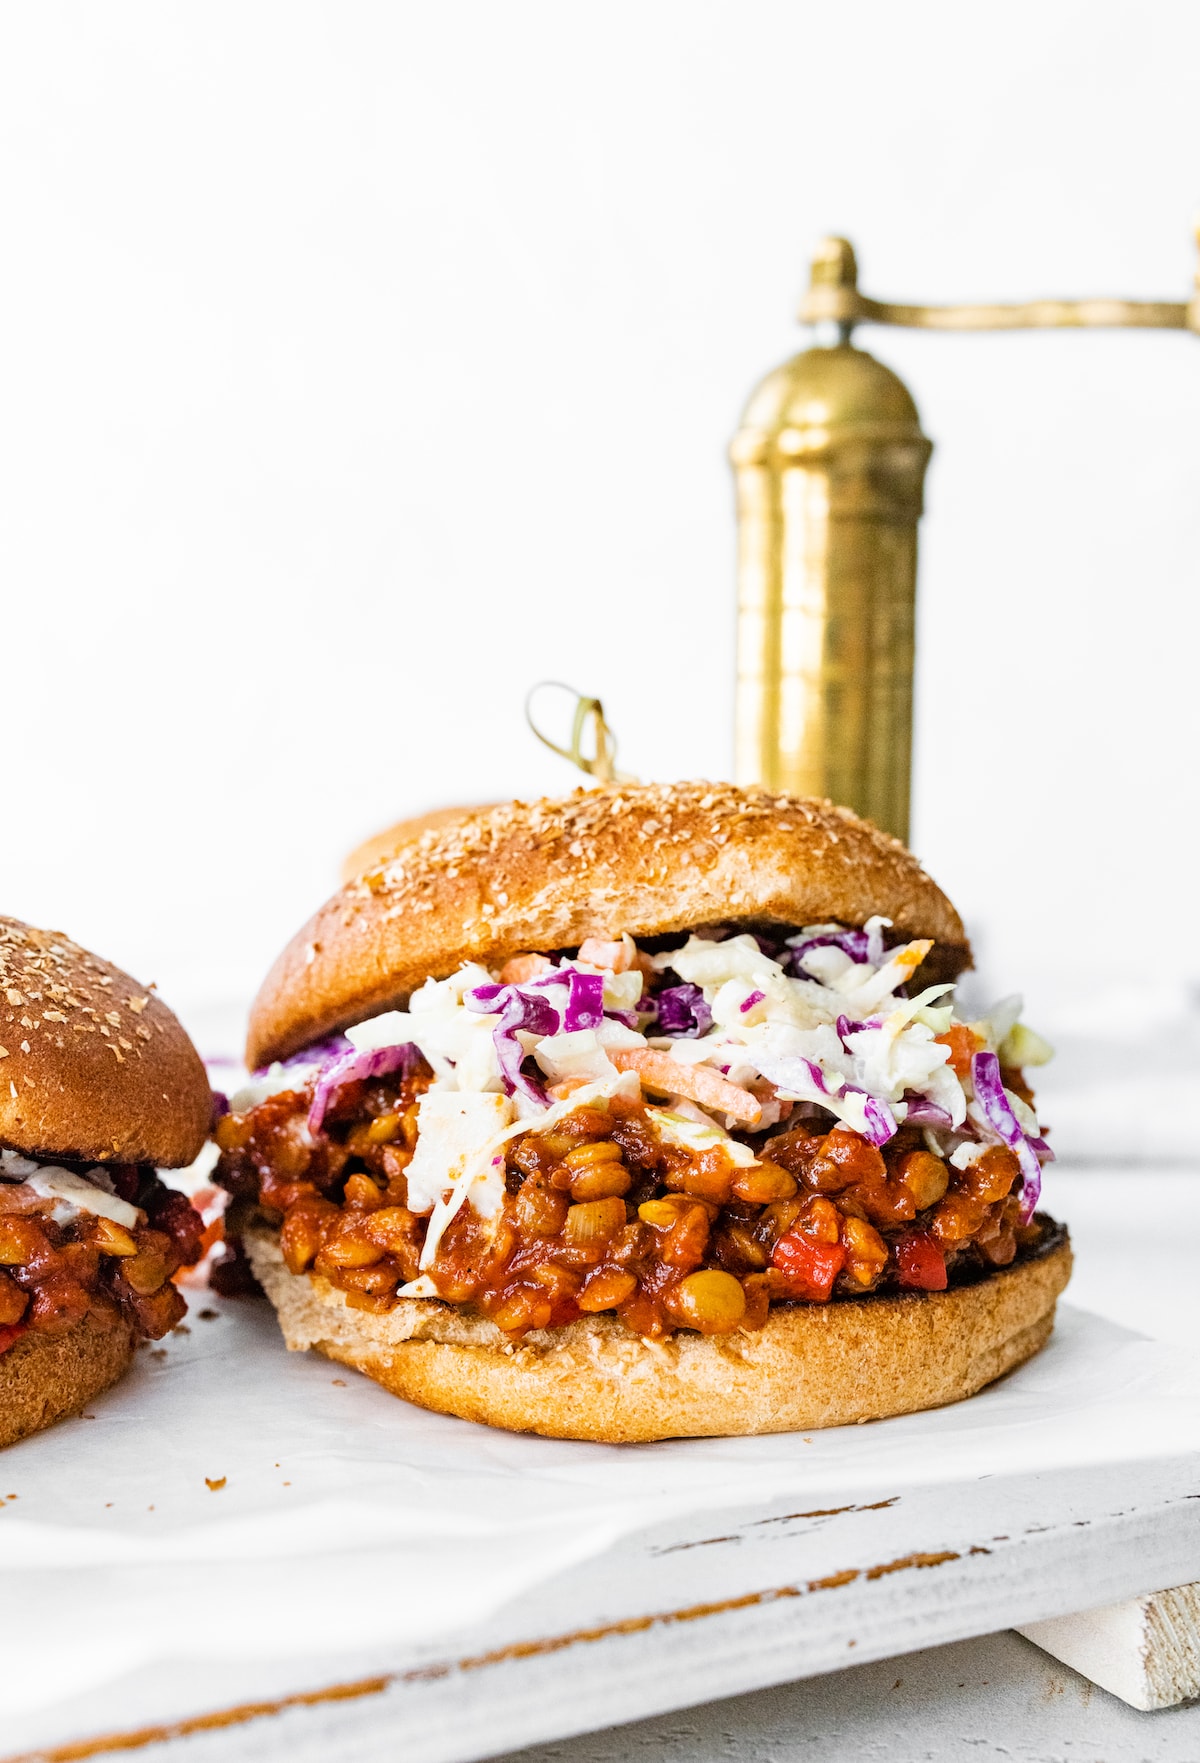 One vegan Sloppy Joe on a whole wheat bun topped with coleslaw with a gold pepper grinder are in the background.